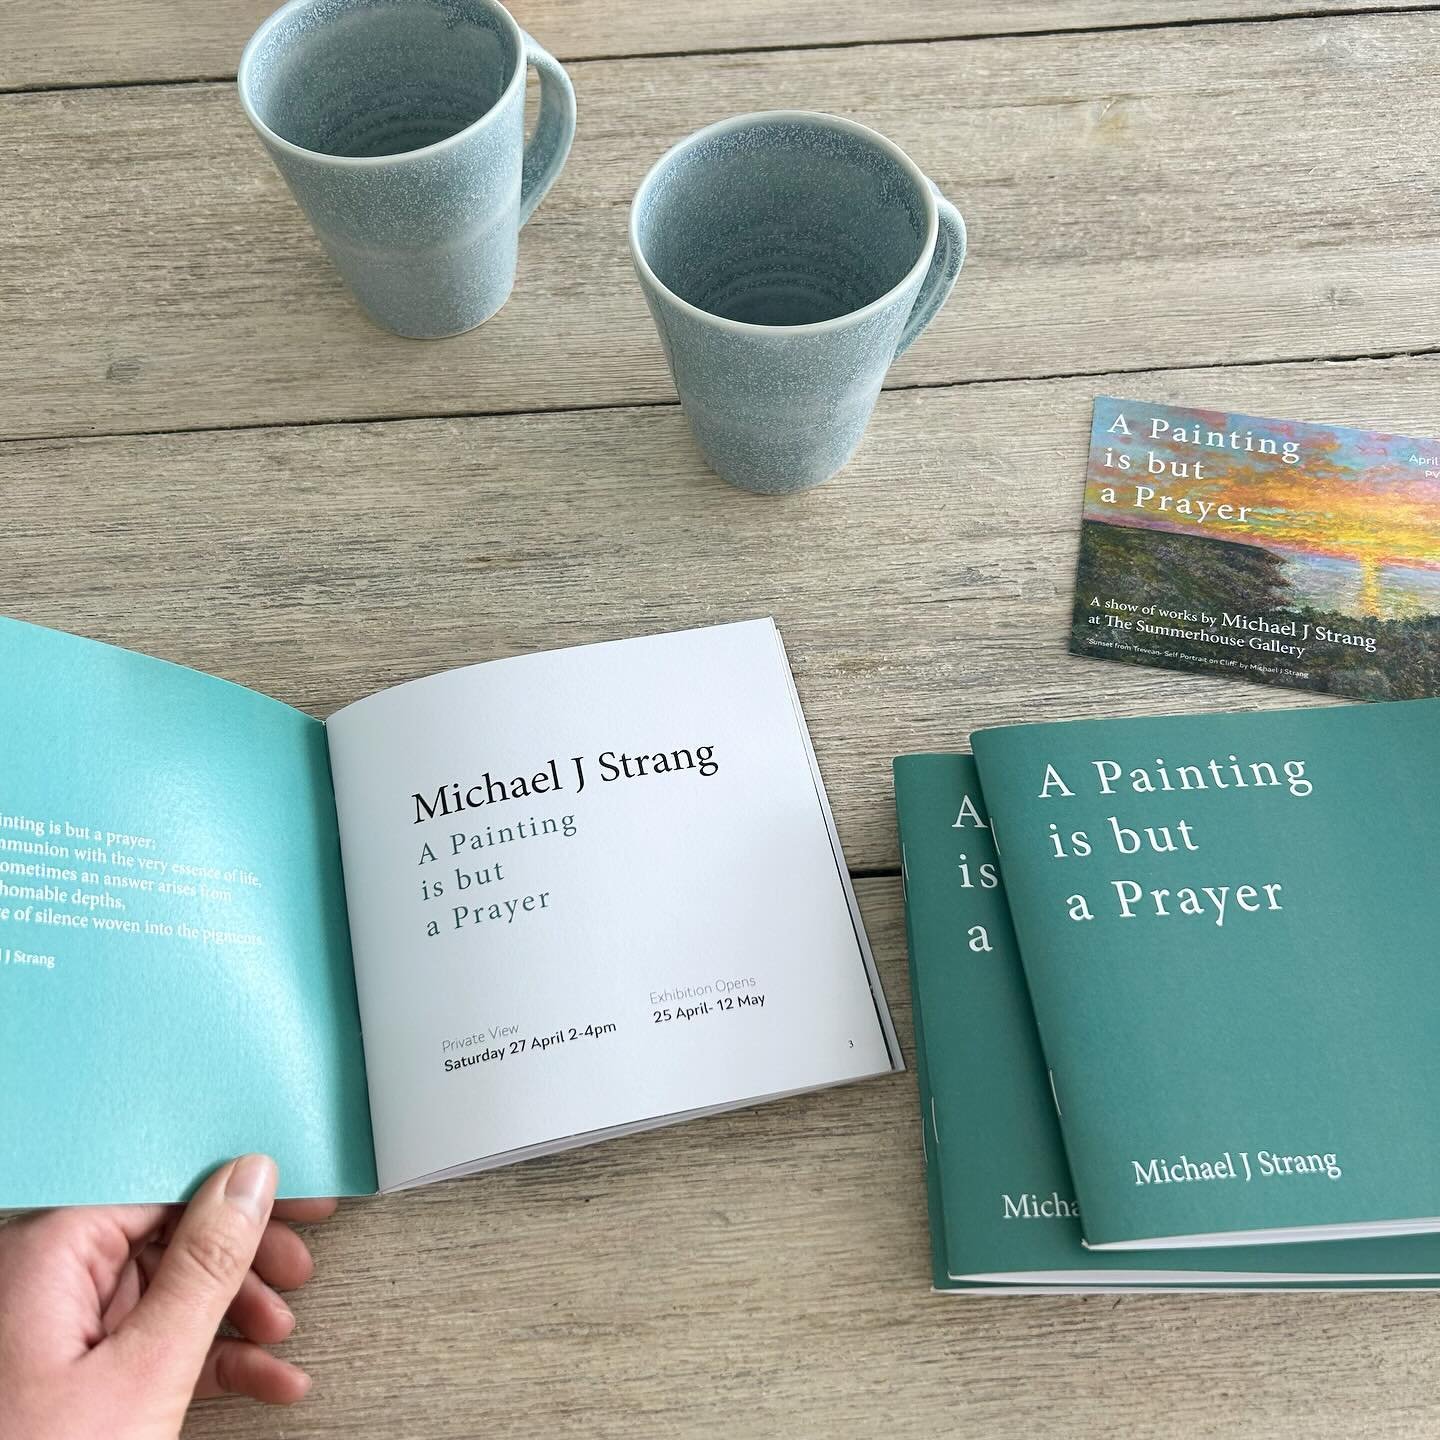 3 days to go until we open the doors to &lsquo;A Painting is but a Prayer&rsquo; a show of works by Michael J Strang. 

The printed show catalogues have arrived and are now available to purchase from the gallery. We can pop one in the post if you don